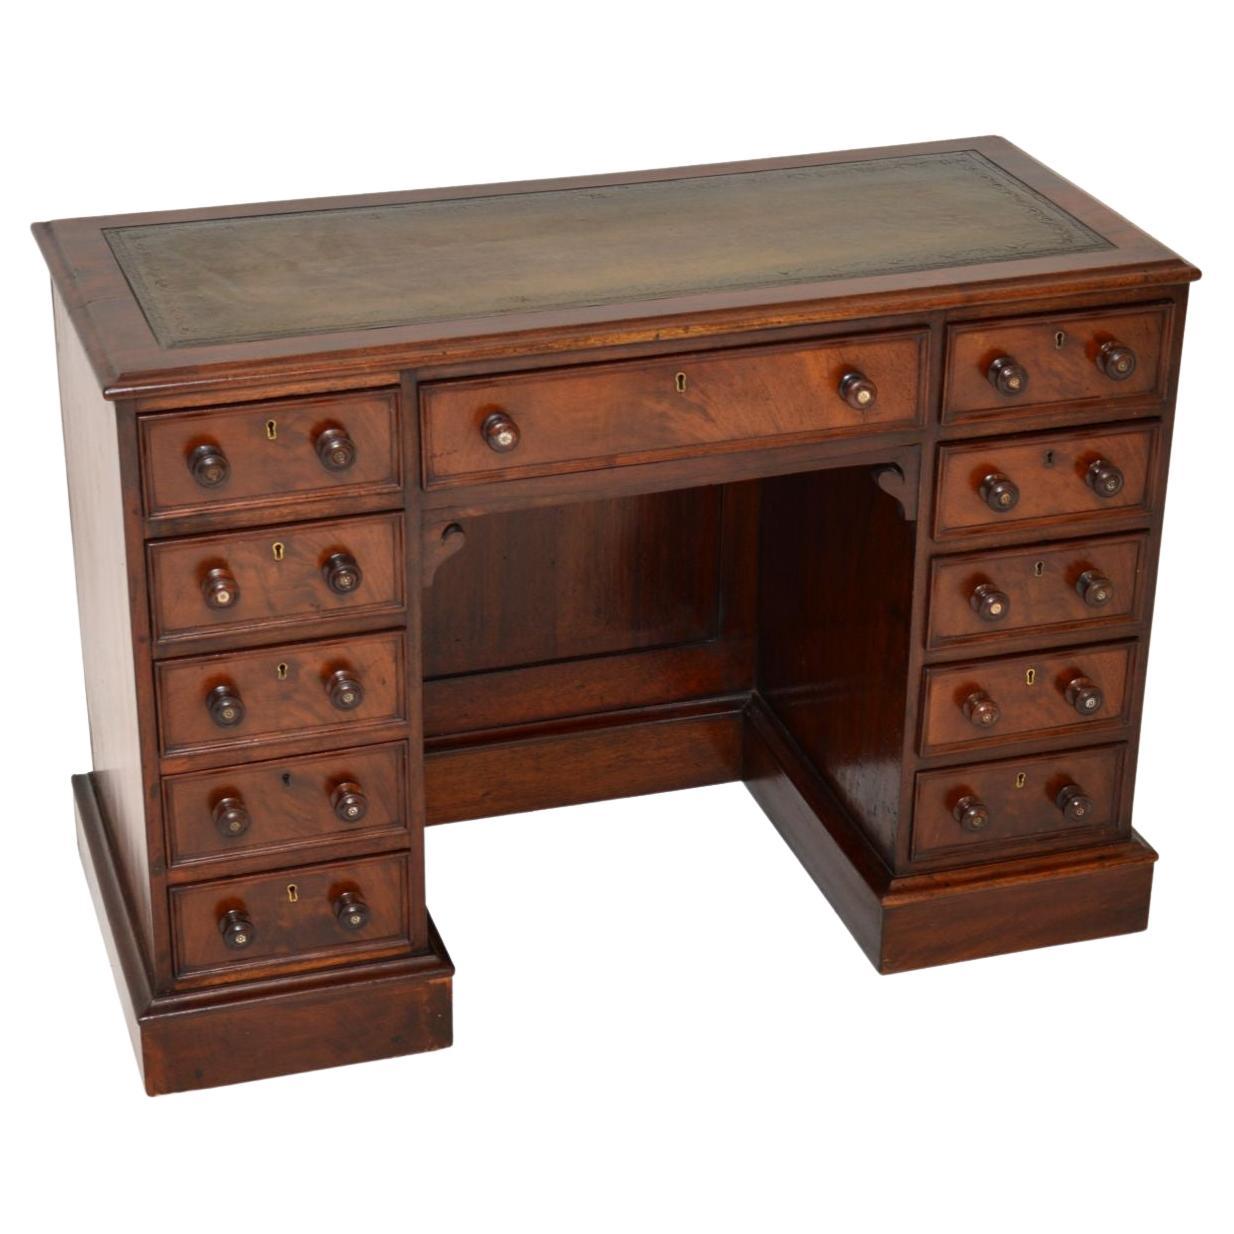 Antique Victorian Leather Top Knee Hole Desk For Sale